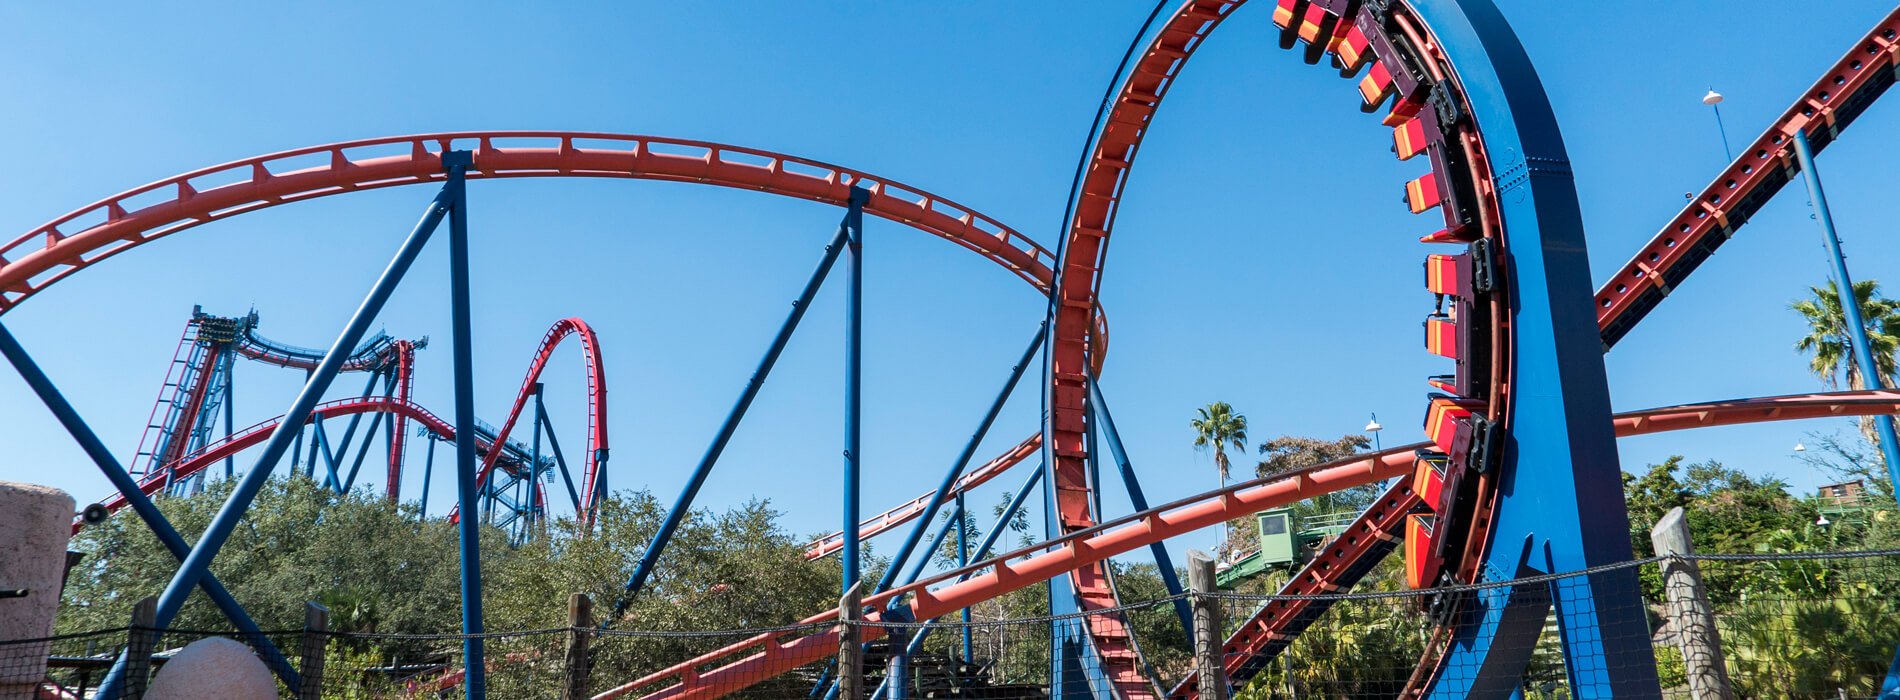 Scorpion steel roller coaster, a red ride at Busch Gardens Tampa Bay, located in Florida